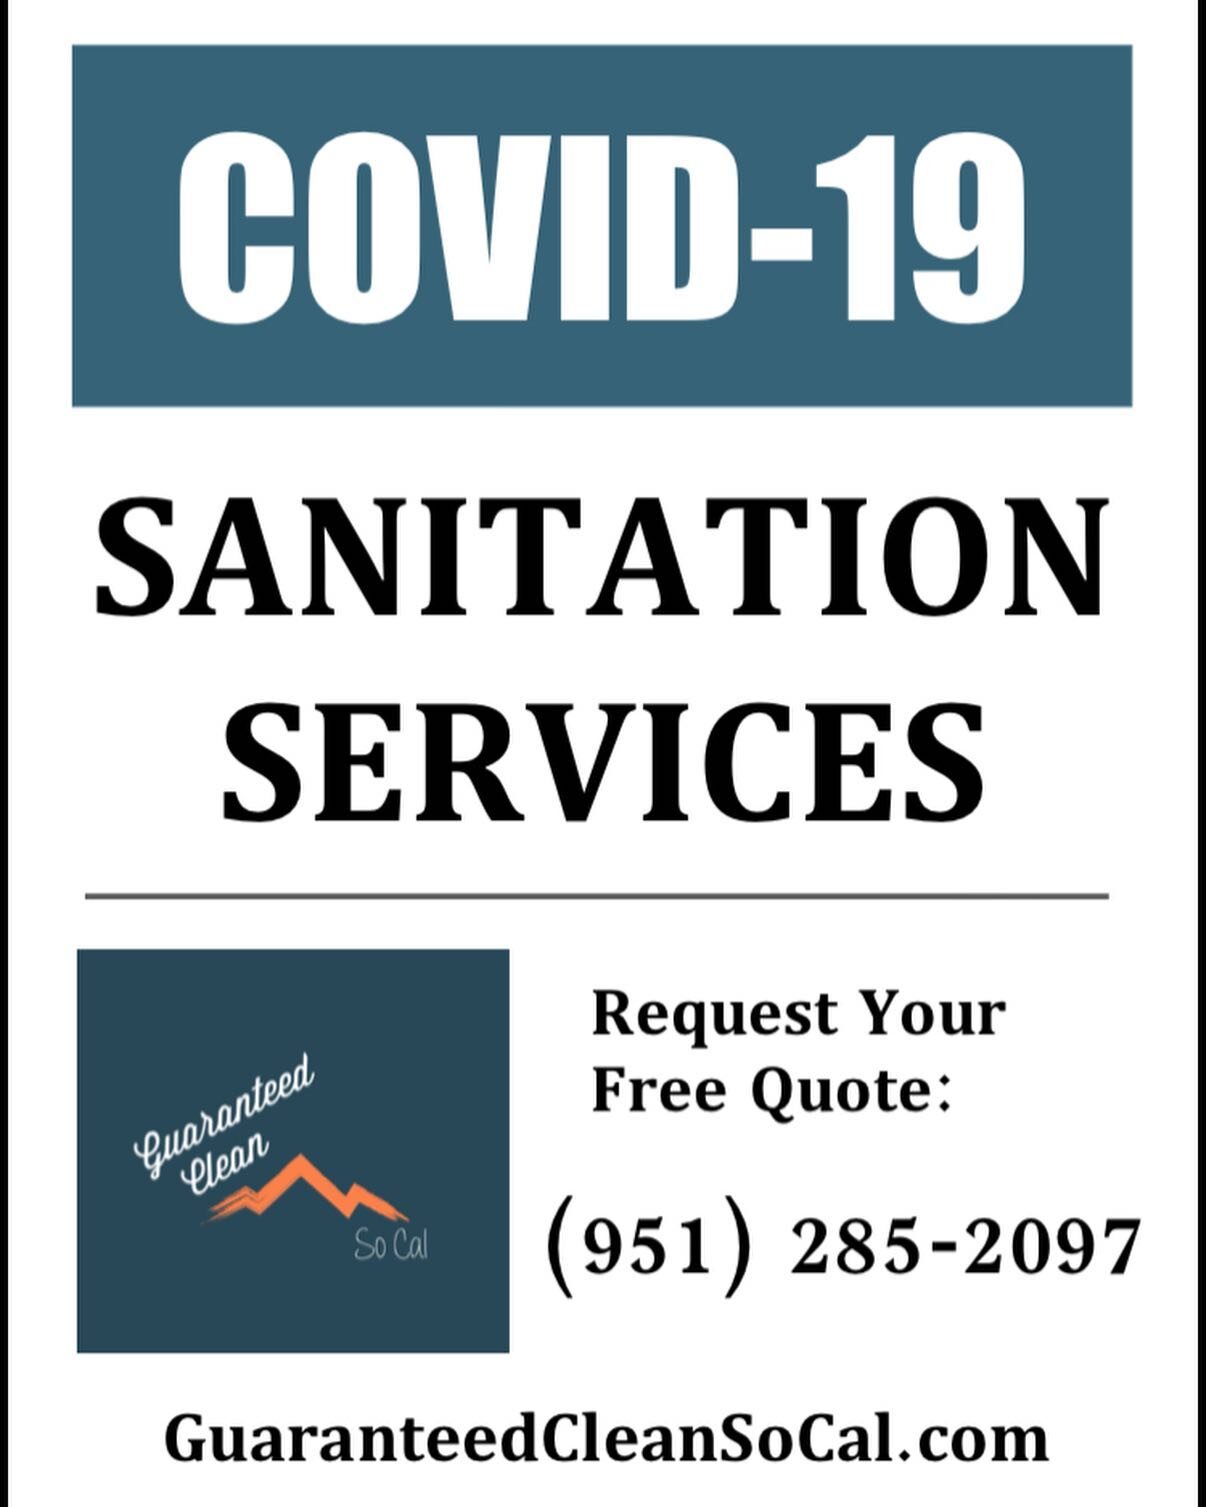 Let the Guaranteed Clean team professionally and naturally rid your facility of COVID-19.  Our EPA registered products are natural, non-toxic and residue-free.  Plus our CDC approved methods give you the confidence to live and work in a clean, saniti